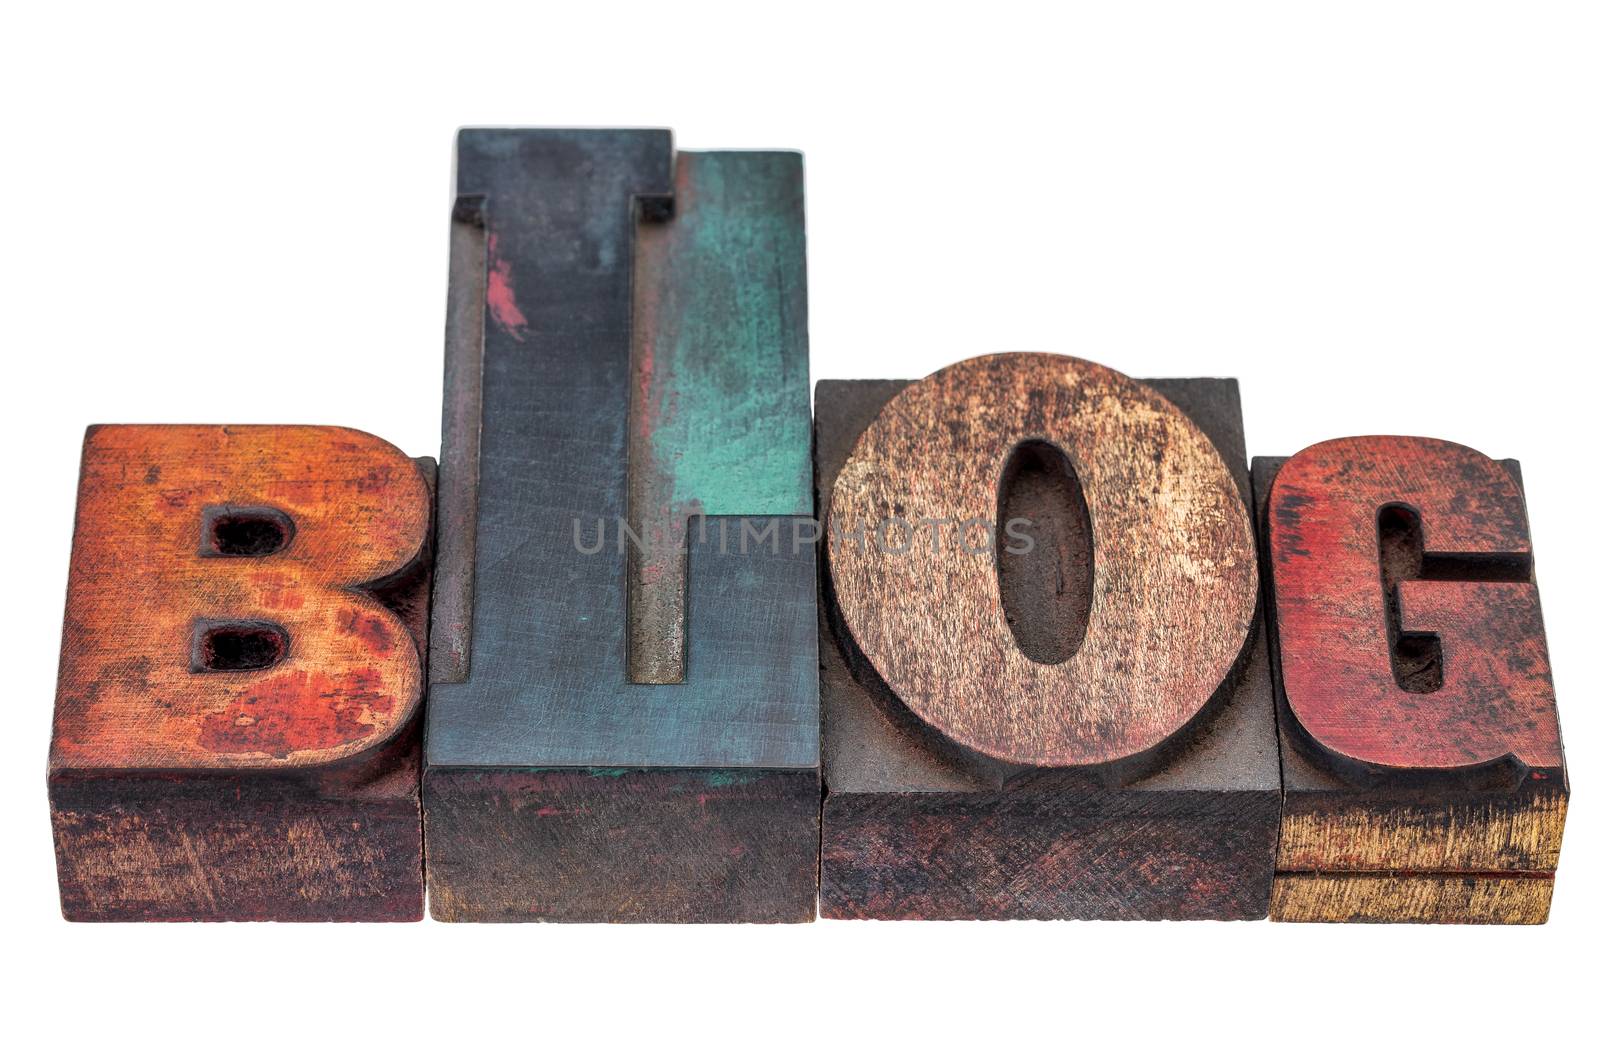 blog word - isolated text in mixed letterpress wood type printing blocks - internet concept